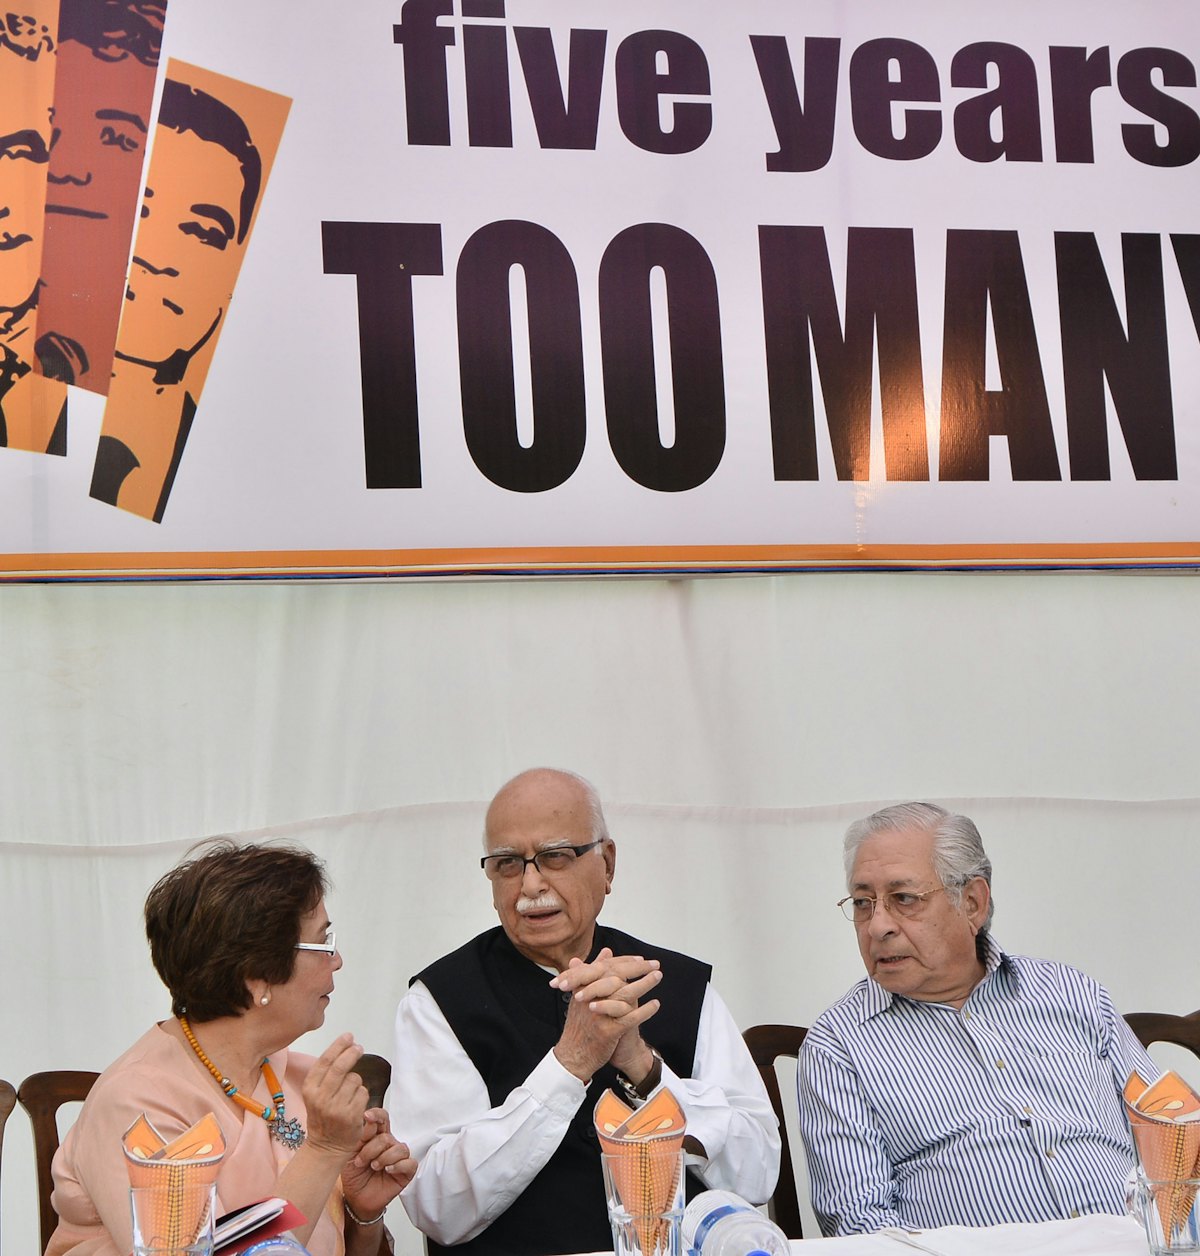 In India, a number of prominent individuals signed a letter calling for the immediate release of the seven Iranian Baha'i leaders. They included L.K. Advani, chairman of the Bharatiya Janata Party, center, and former Indian Attorney General Soli Sorabjee, right. At left is Mrs Zena Sorabjee.